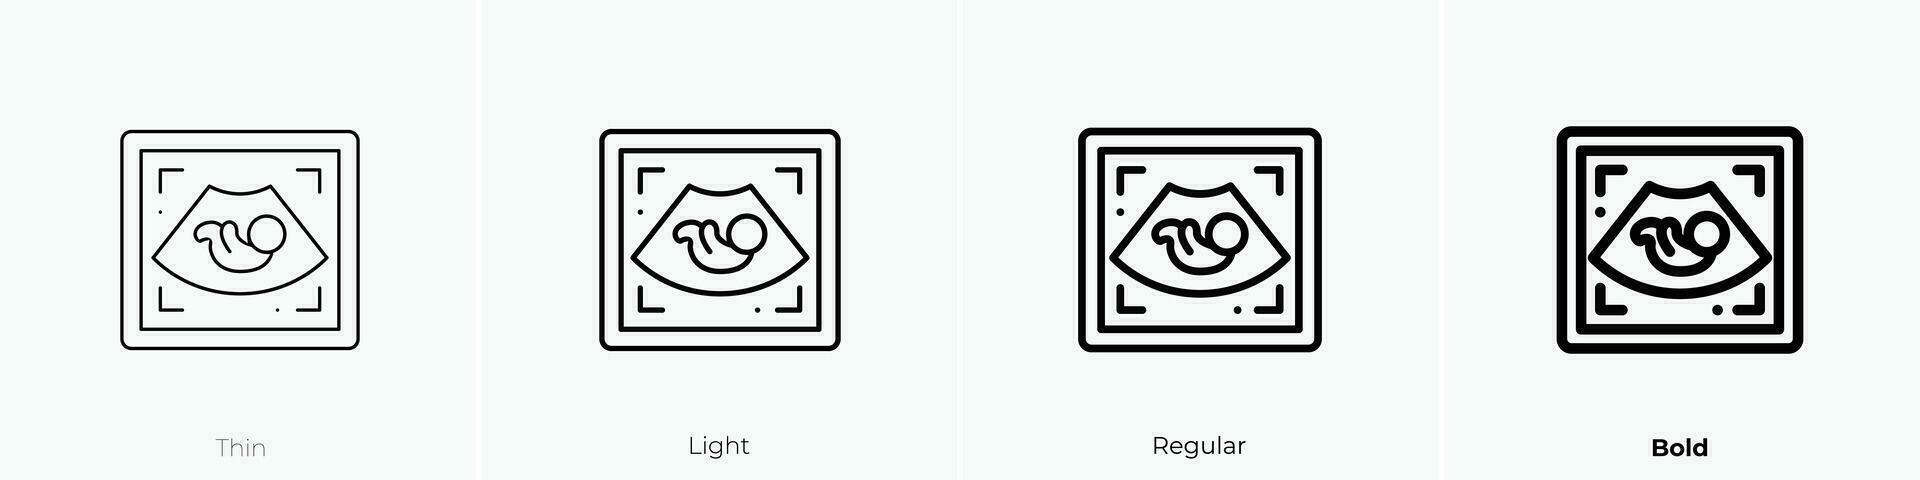 ultrasound icon. Thin, Light, Regular And Bold style design isolated on white background vector